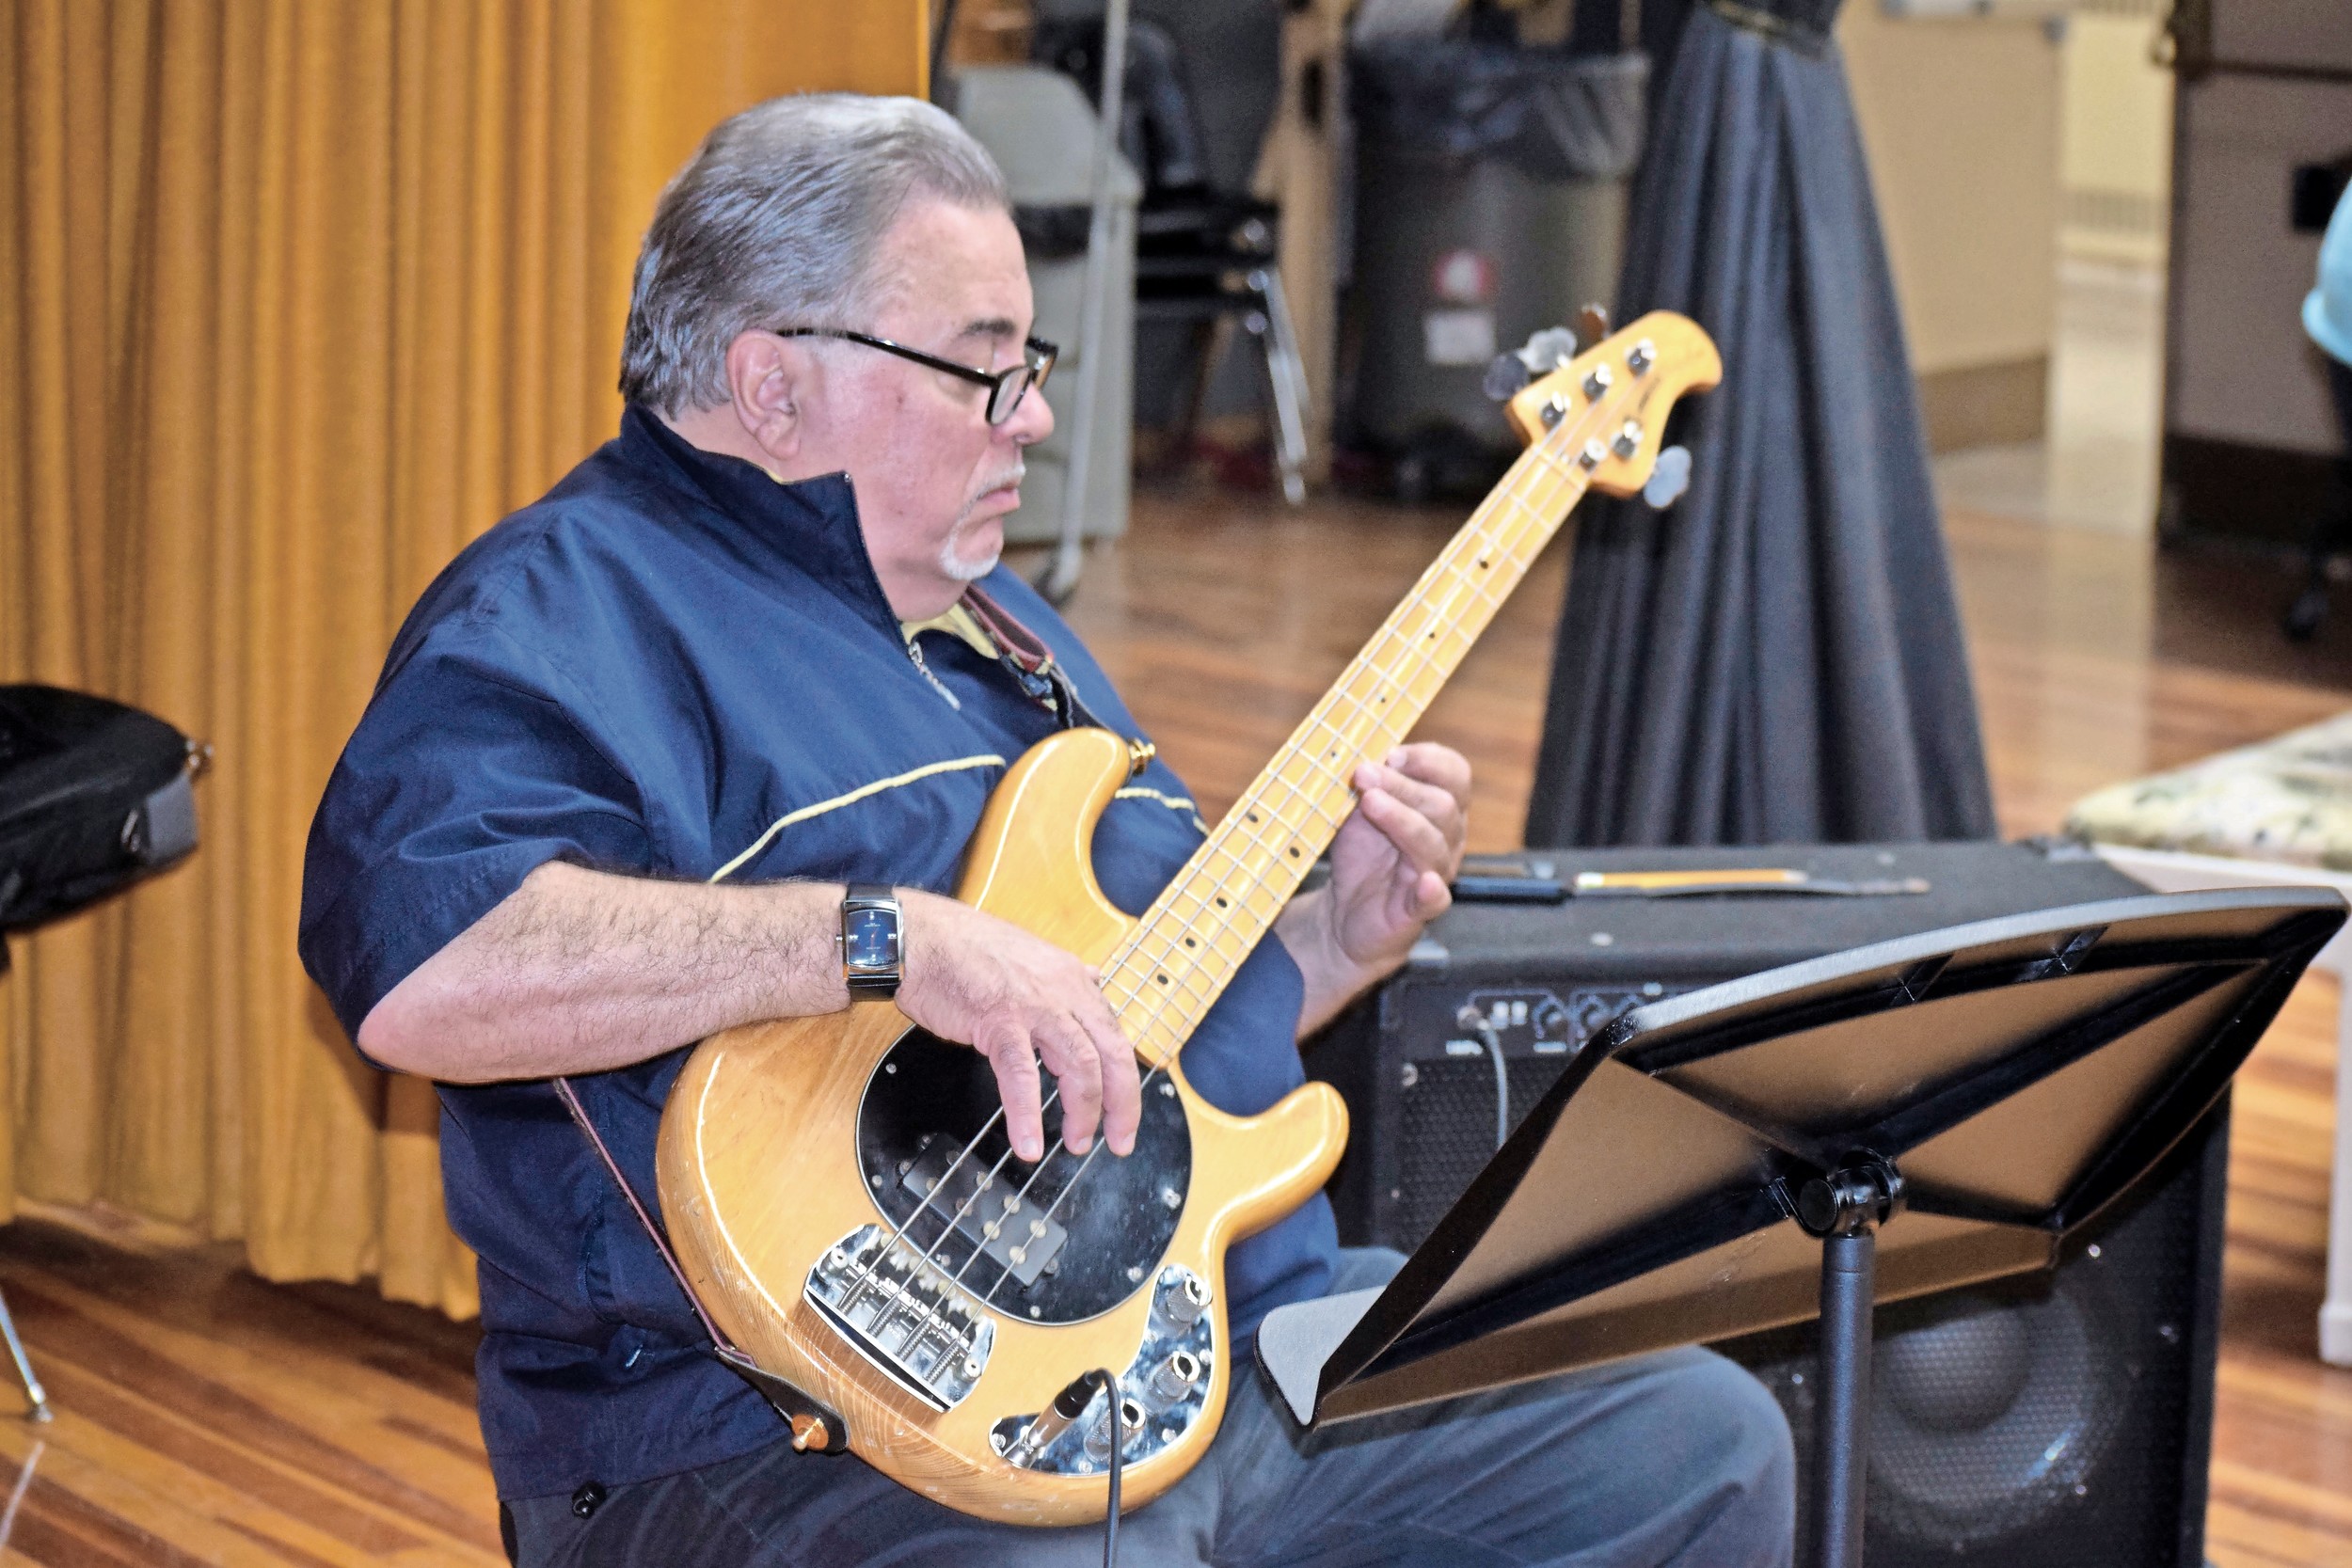 Cliff Heepe, a longtime member of the band, tuned his guitar for the spring concert.